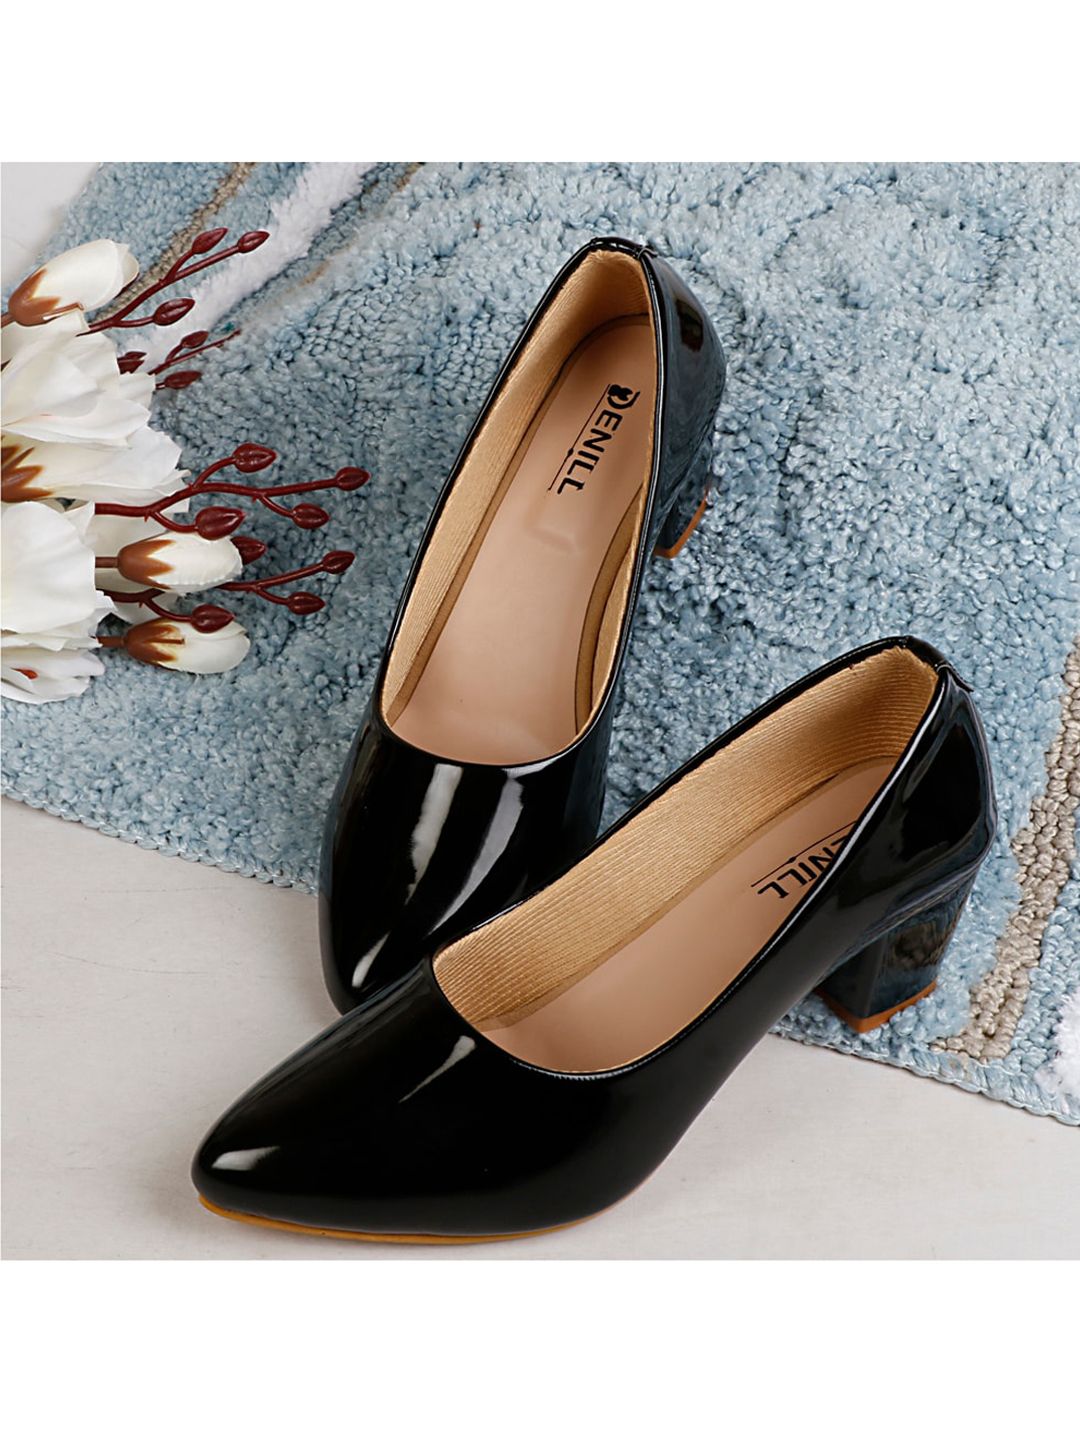 Denill Black Pointed Toe Block Pumps Price in India